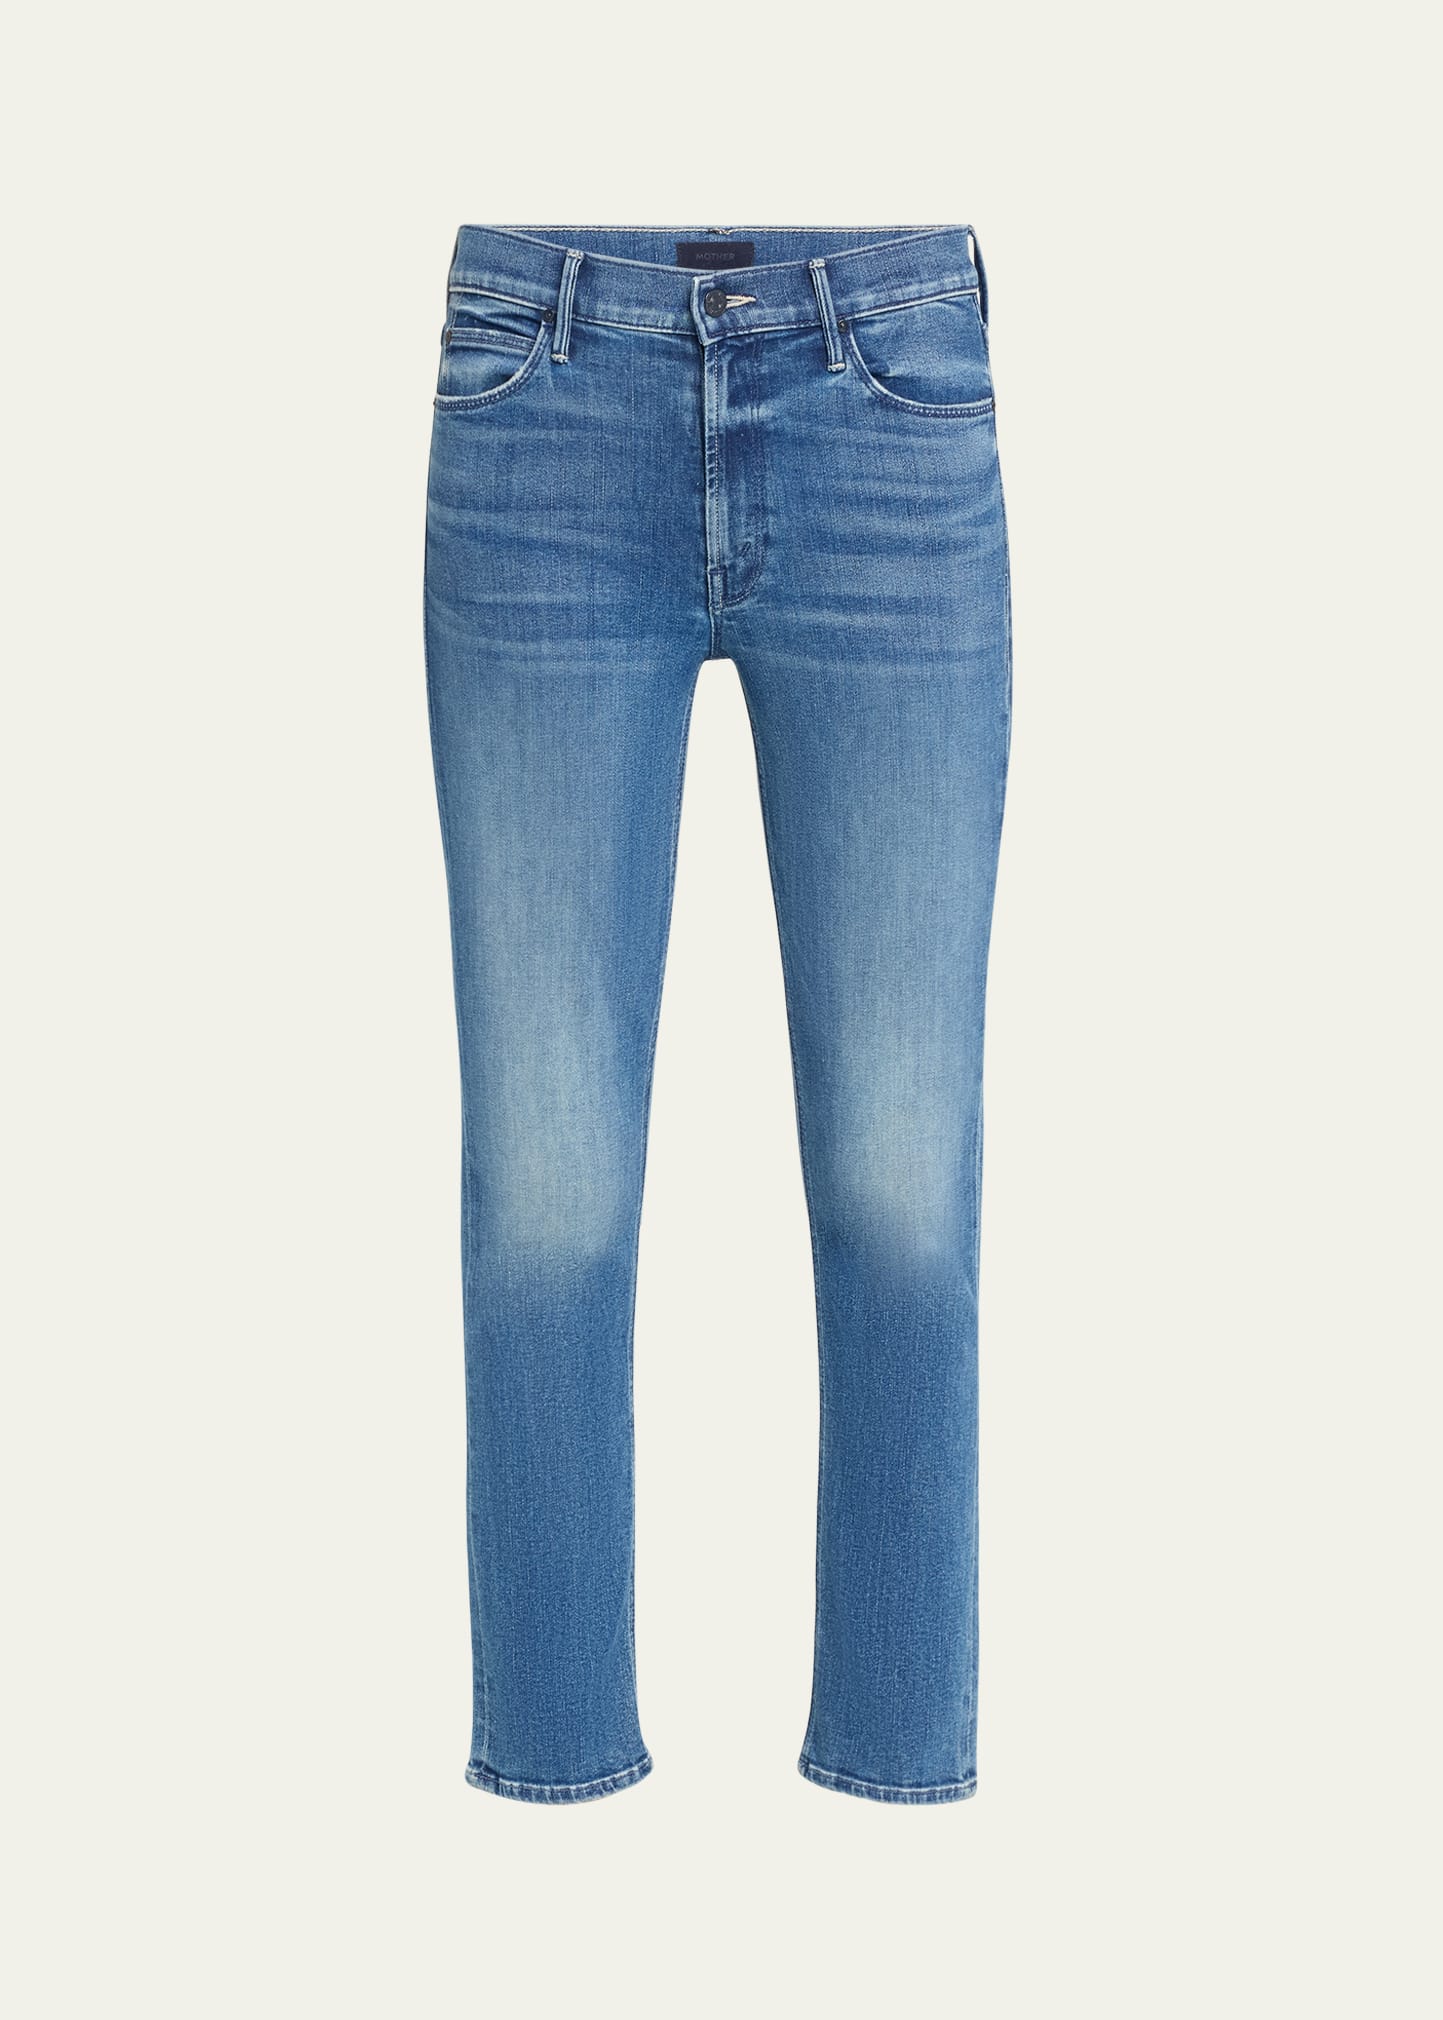 The Mid Rise Dazzler Jeans